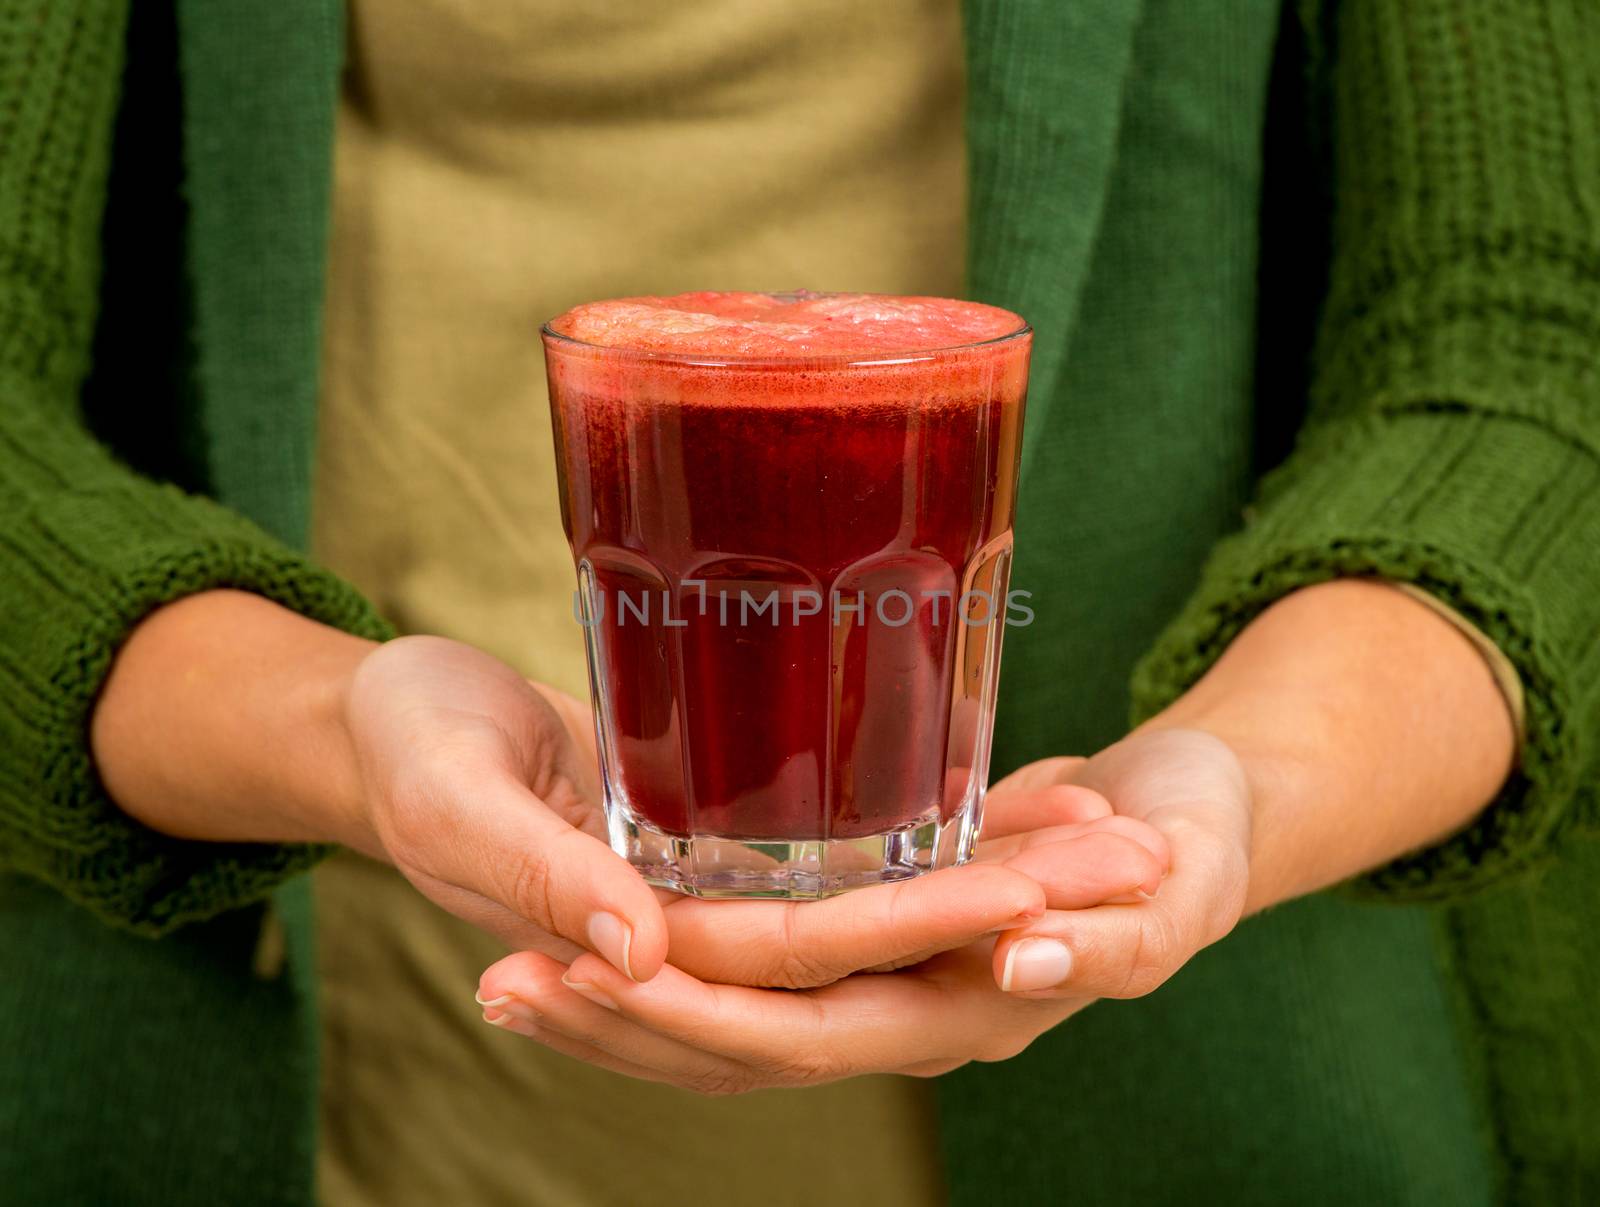 Woman holding a glass of red juice. Preparing a detox juice.  